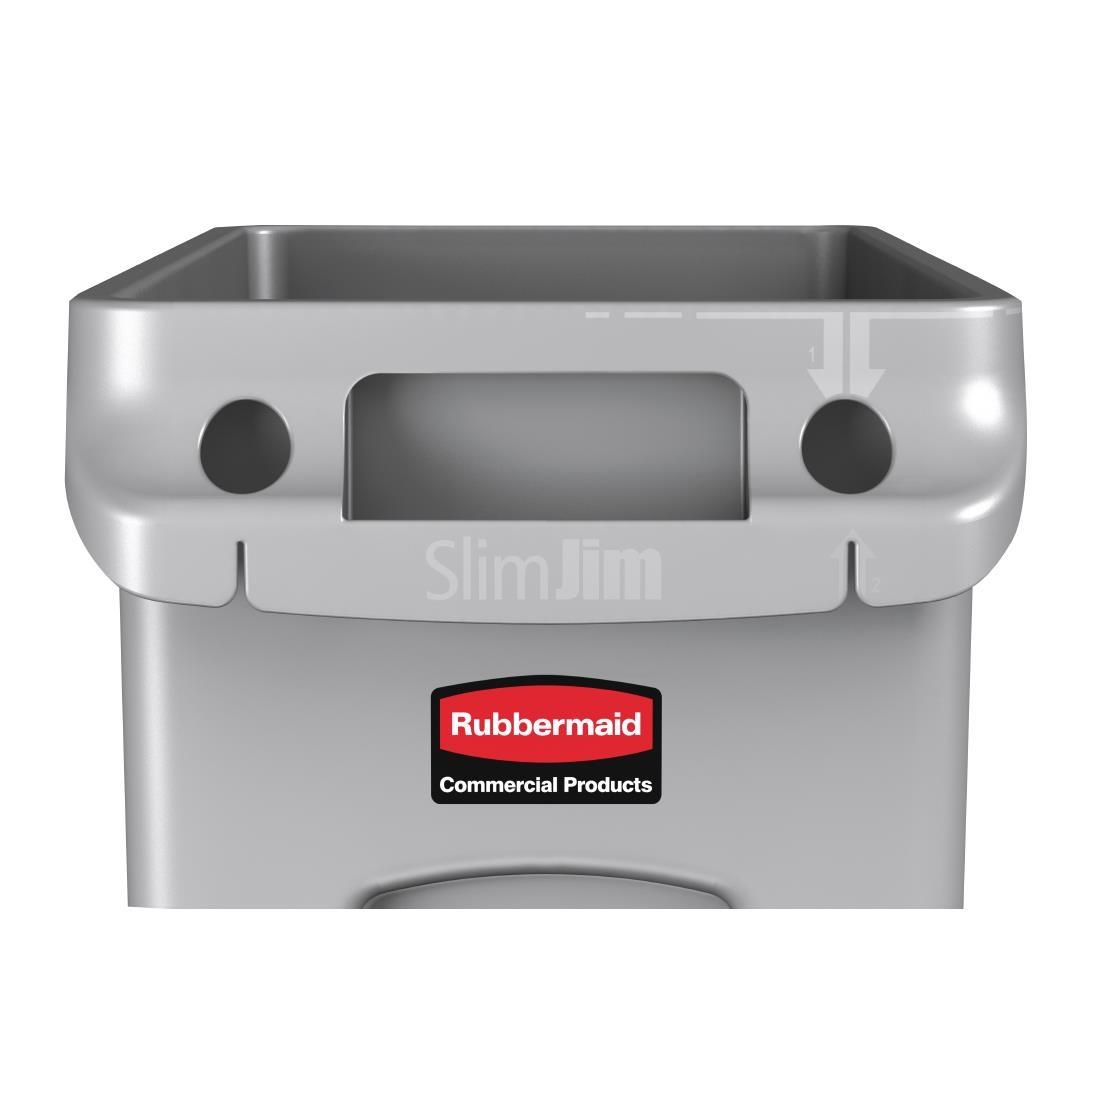 Rubbermaid Slim Jim Container With Venting Channels Grey 87Ltr - F649  - 4